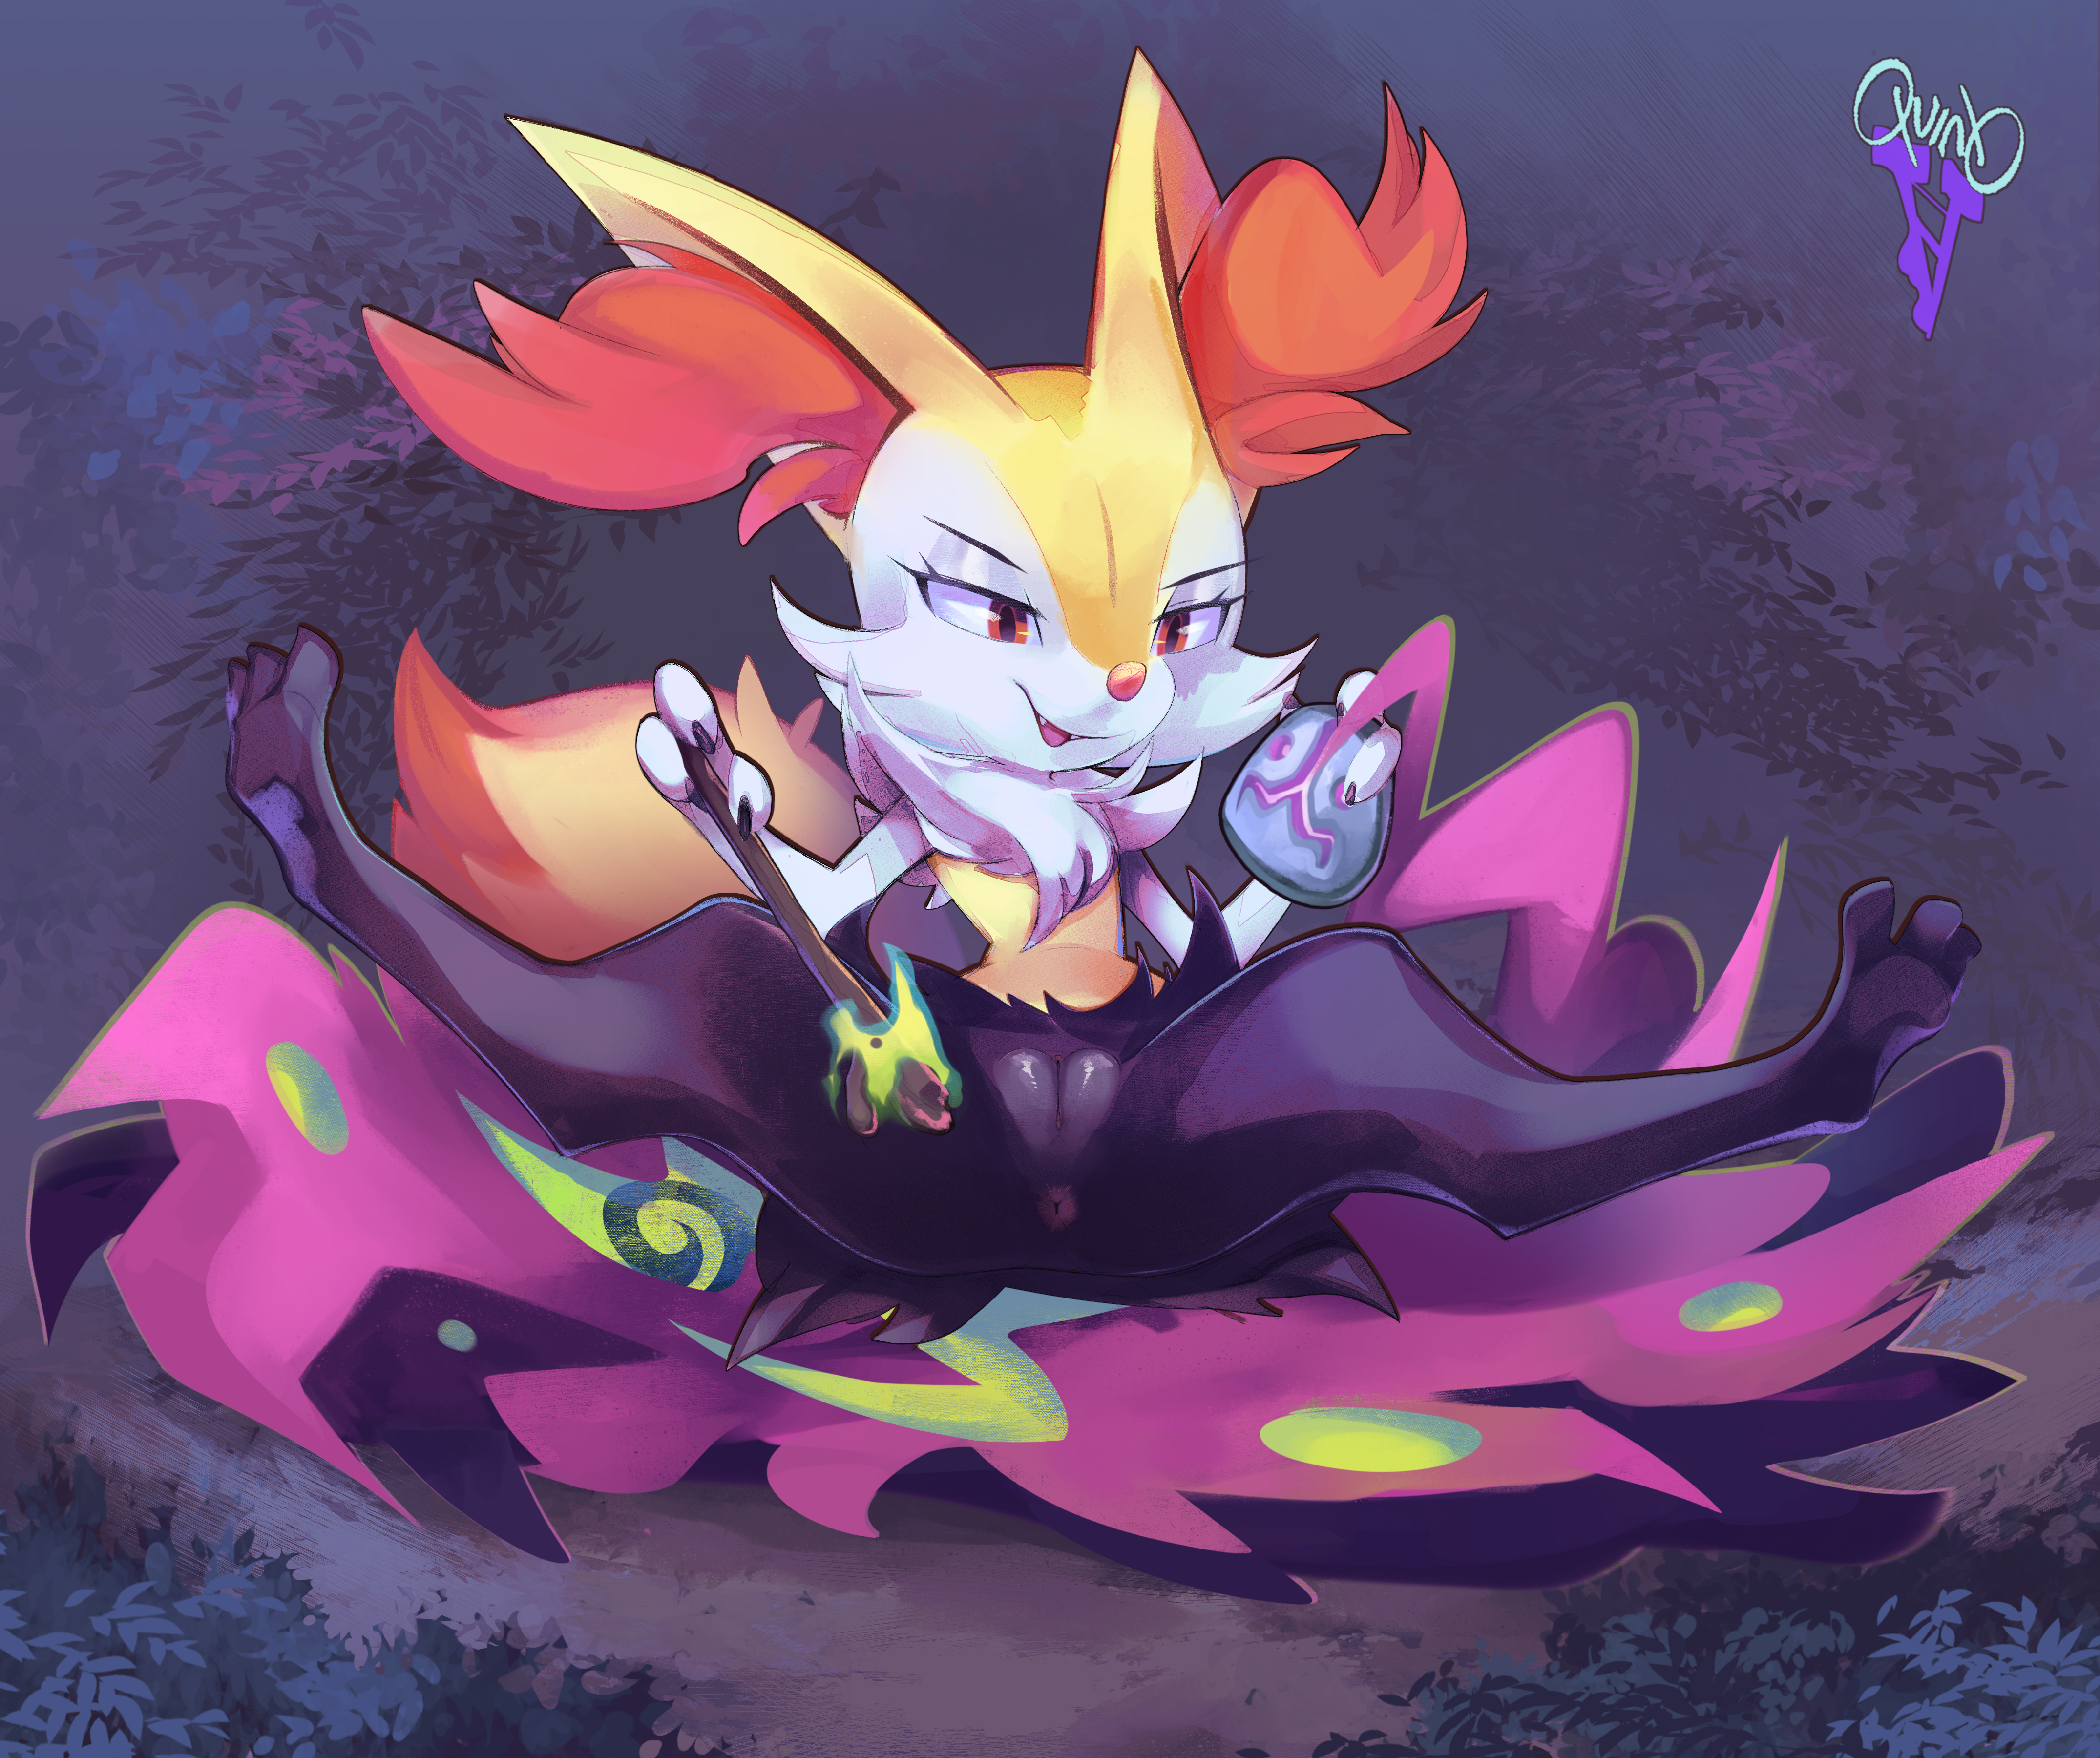 Braixen and the Wicked spirit - Piczel.tv.